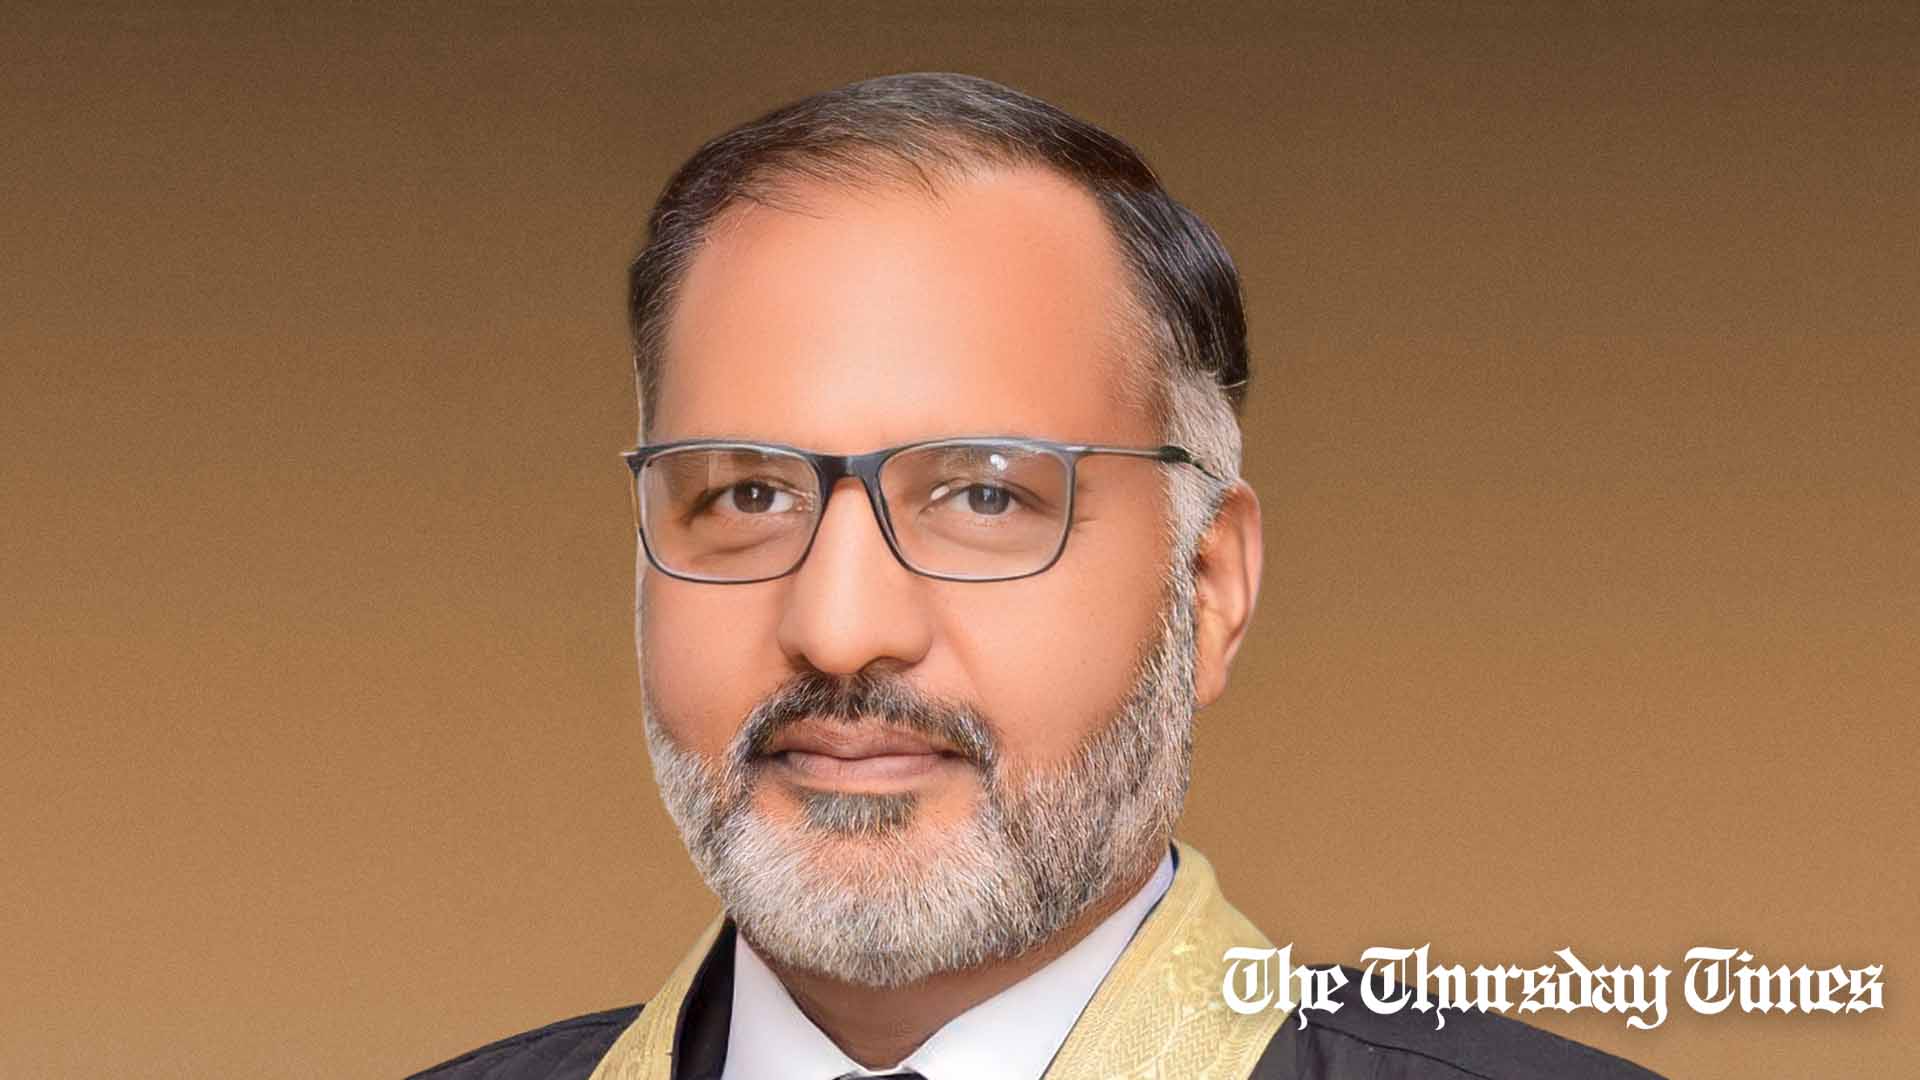 A file photo is shown of former Islamabad High Court Senior Justice Shaukat Aziz Siddiqui. — FILE/THE THURSDAY TIMES